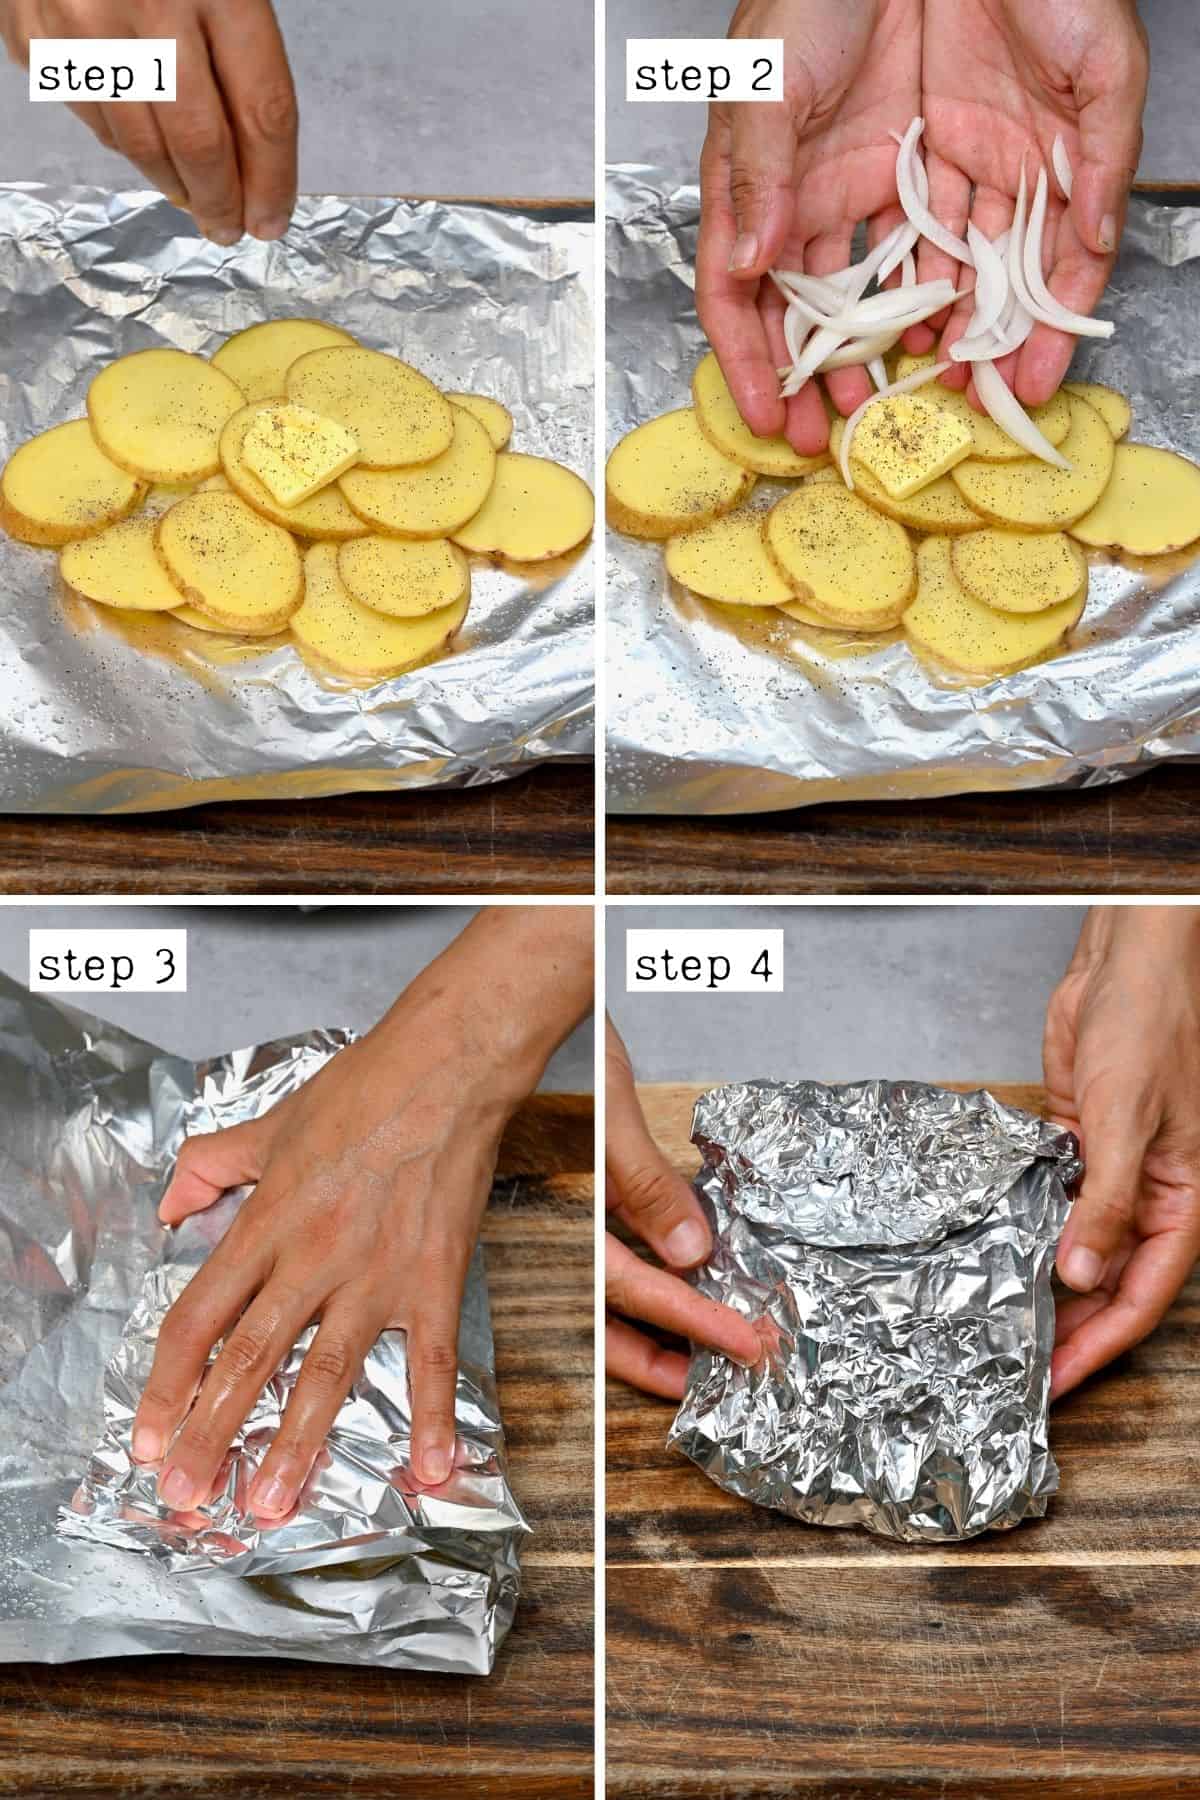 Steps for wrapping potatoes in aluminum foil